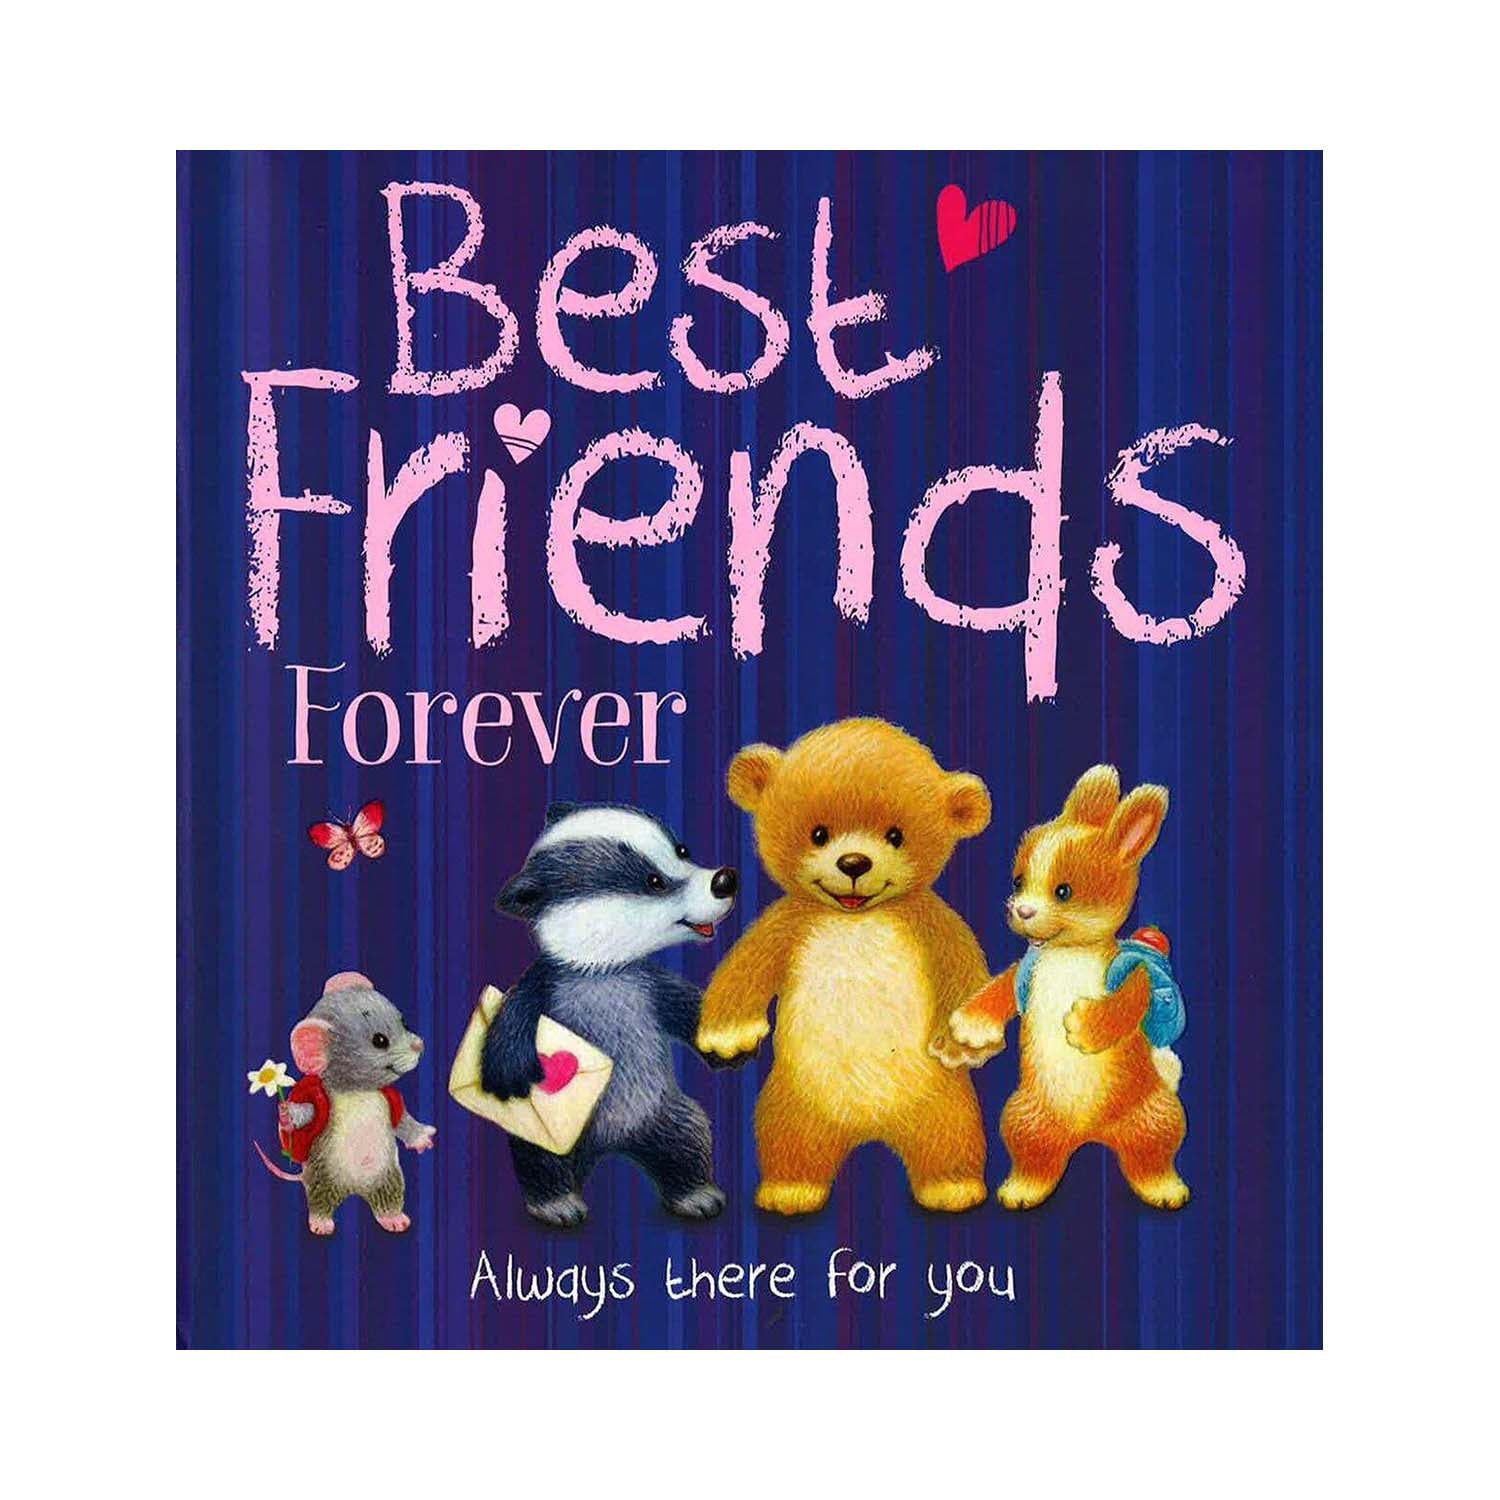 Buy Best Friends Forever Always there for you – Parragon Publishing